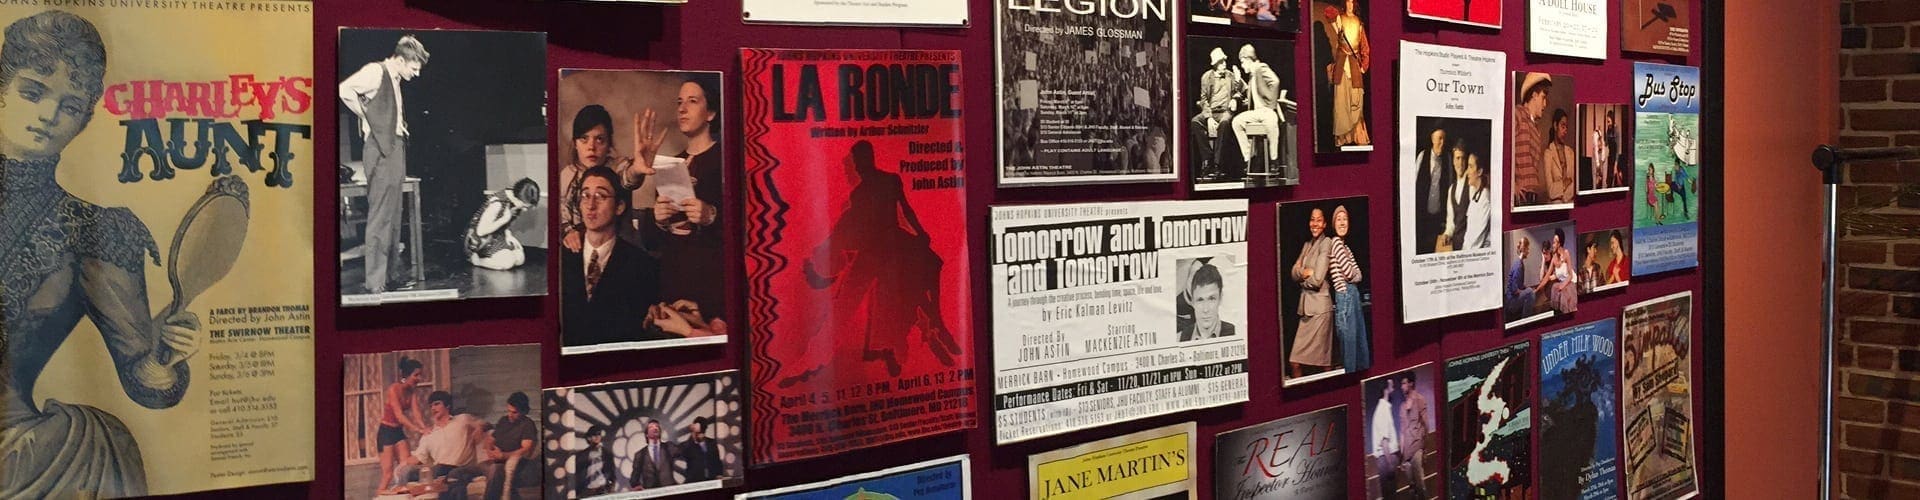 Wall of posters showing all theatre productions